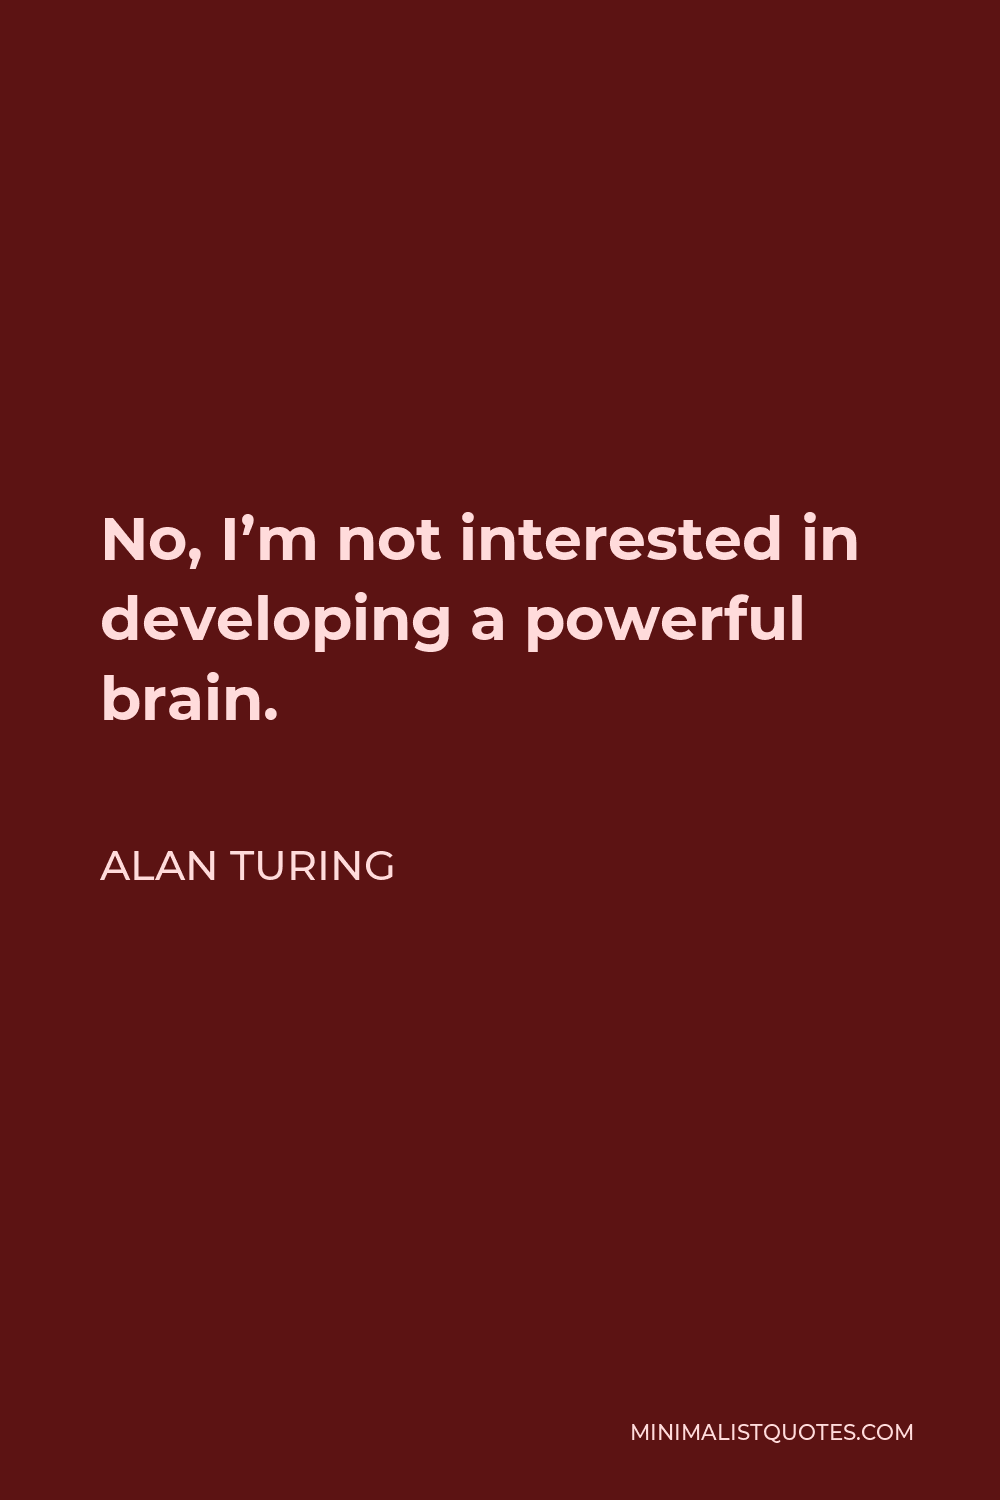 Alan Turing Quote - No, I’m not interested in developing a powerful brain. All I’m after is just a mediocre brain, something like the President of the American Telephone and Telegraph Company.